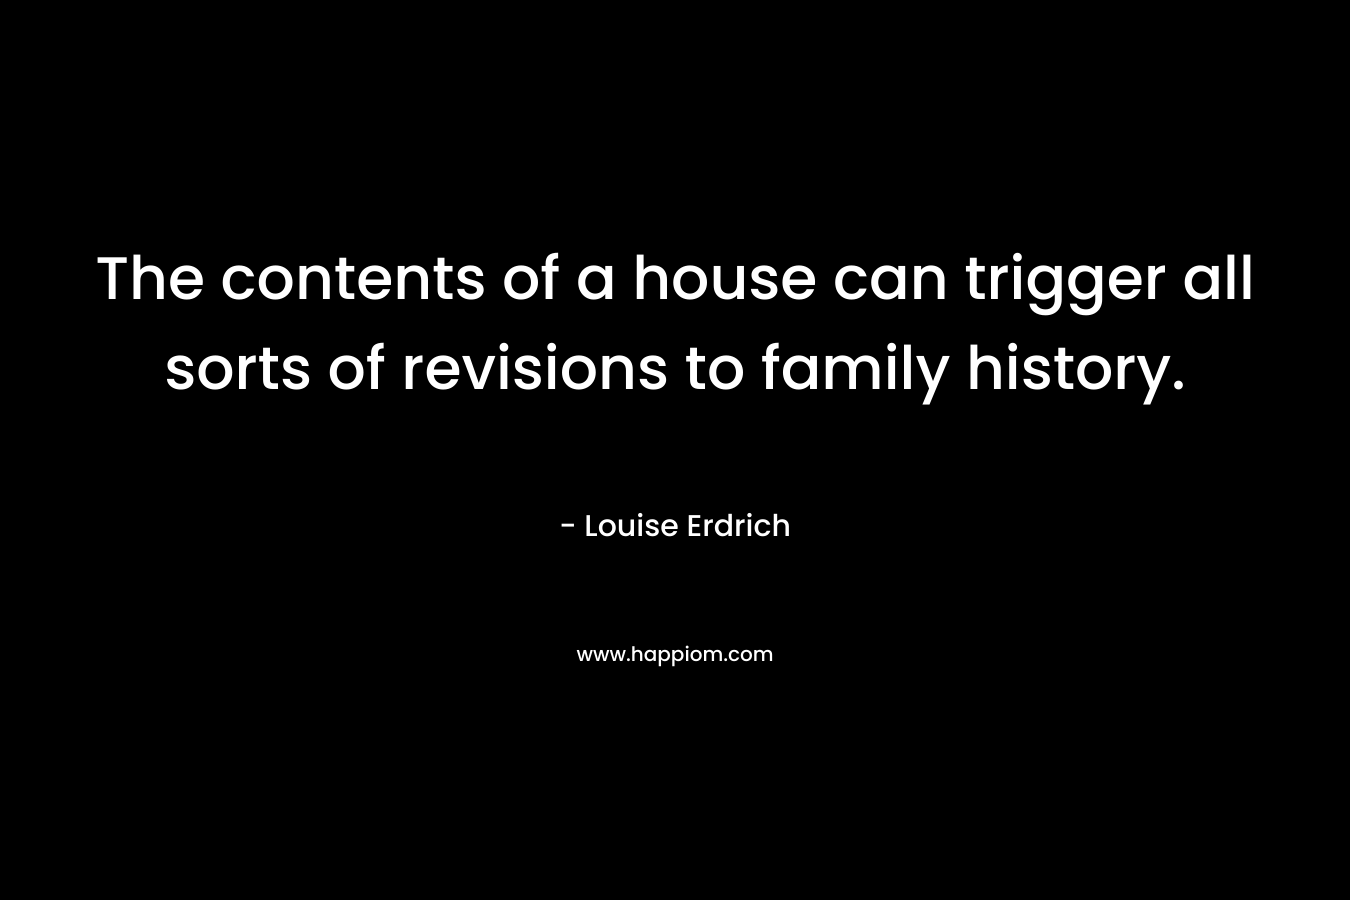 The contents of a house can trigger all sorts of revisions to family history. – Louise Erdrich